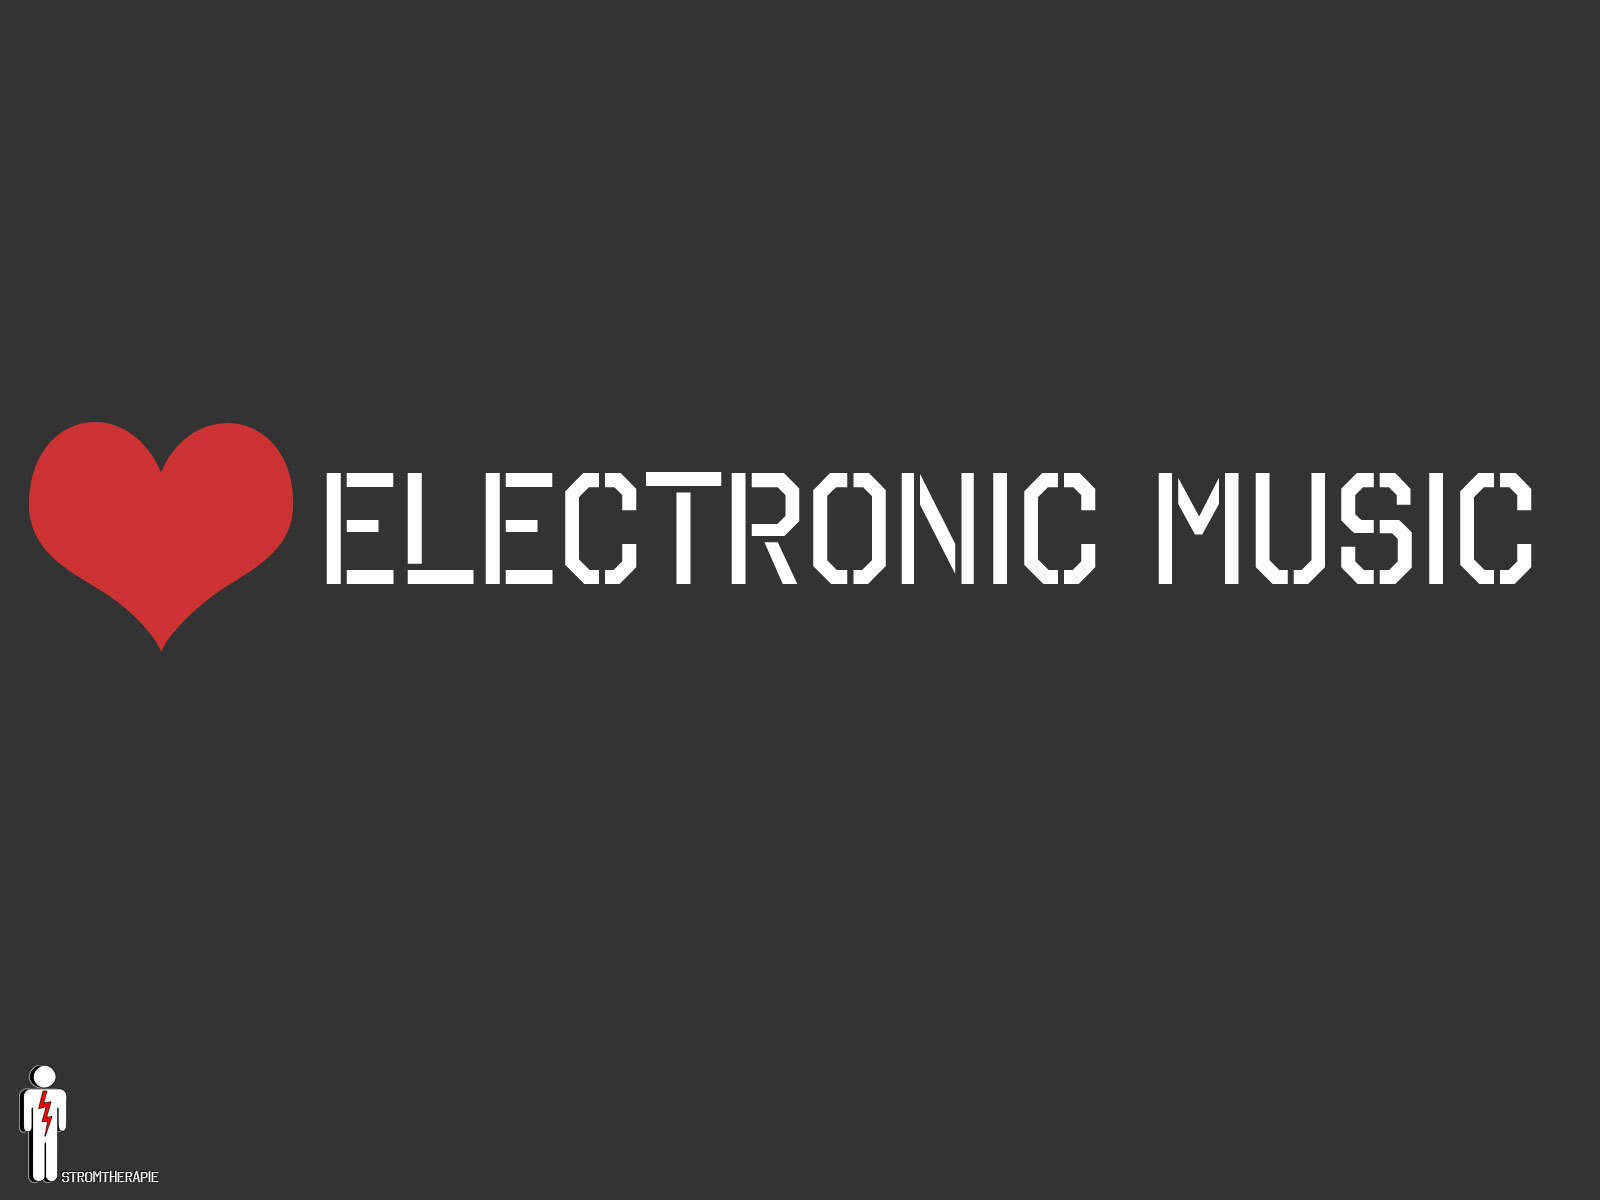 House Electro Music Image HD Wallpaper And Background Photos